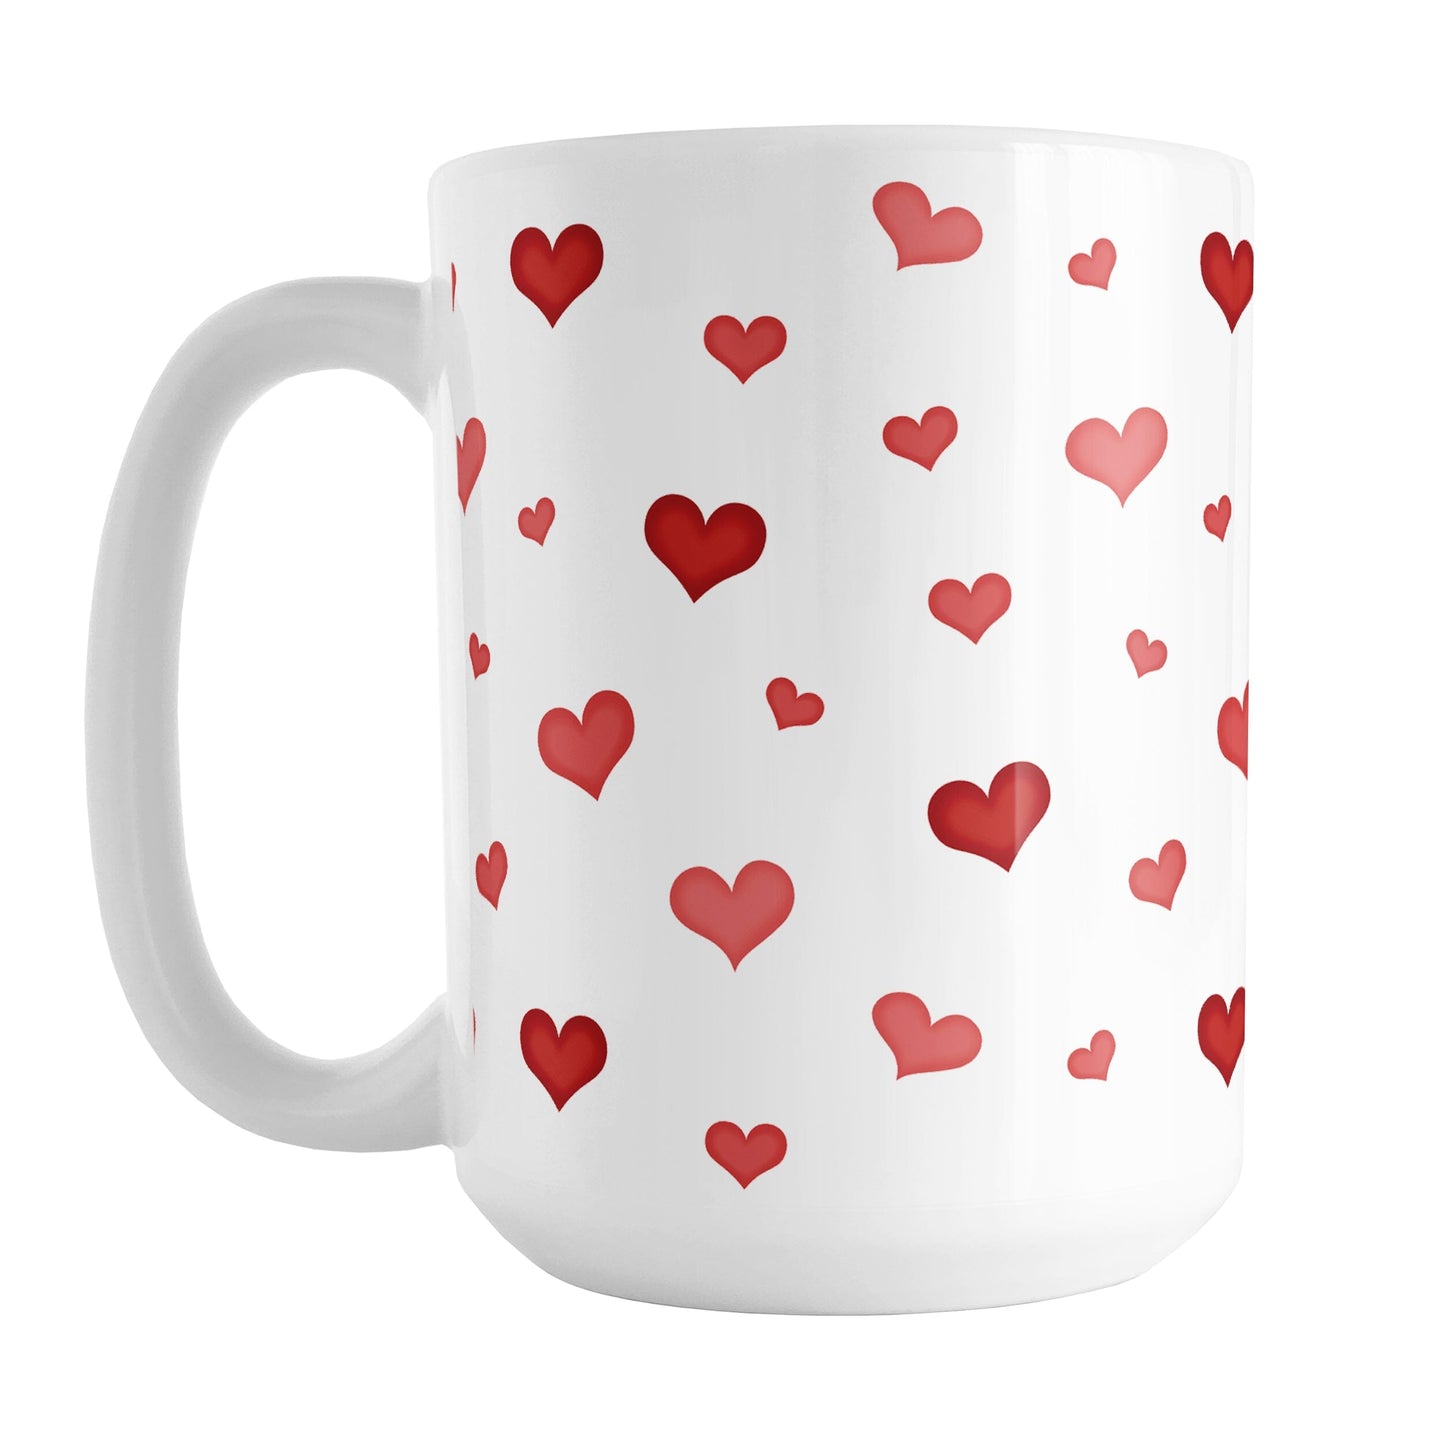 Dainty Cute Red Hearts Mug (15oz) at Amy's Coffee Mugs. A ceramic coffee mug designed with a print of cute and dainty hand-drawn re hearts in different shades of red in a pattern that wraps around the mug up to the handle. 